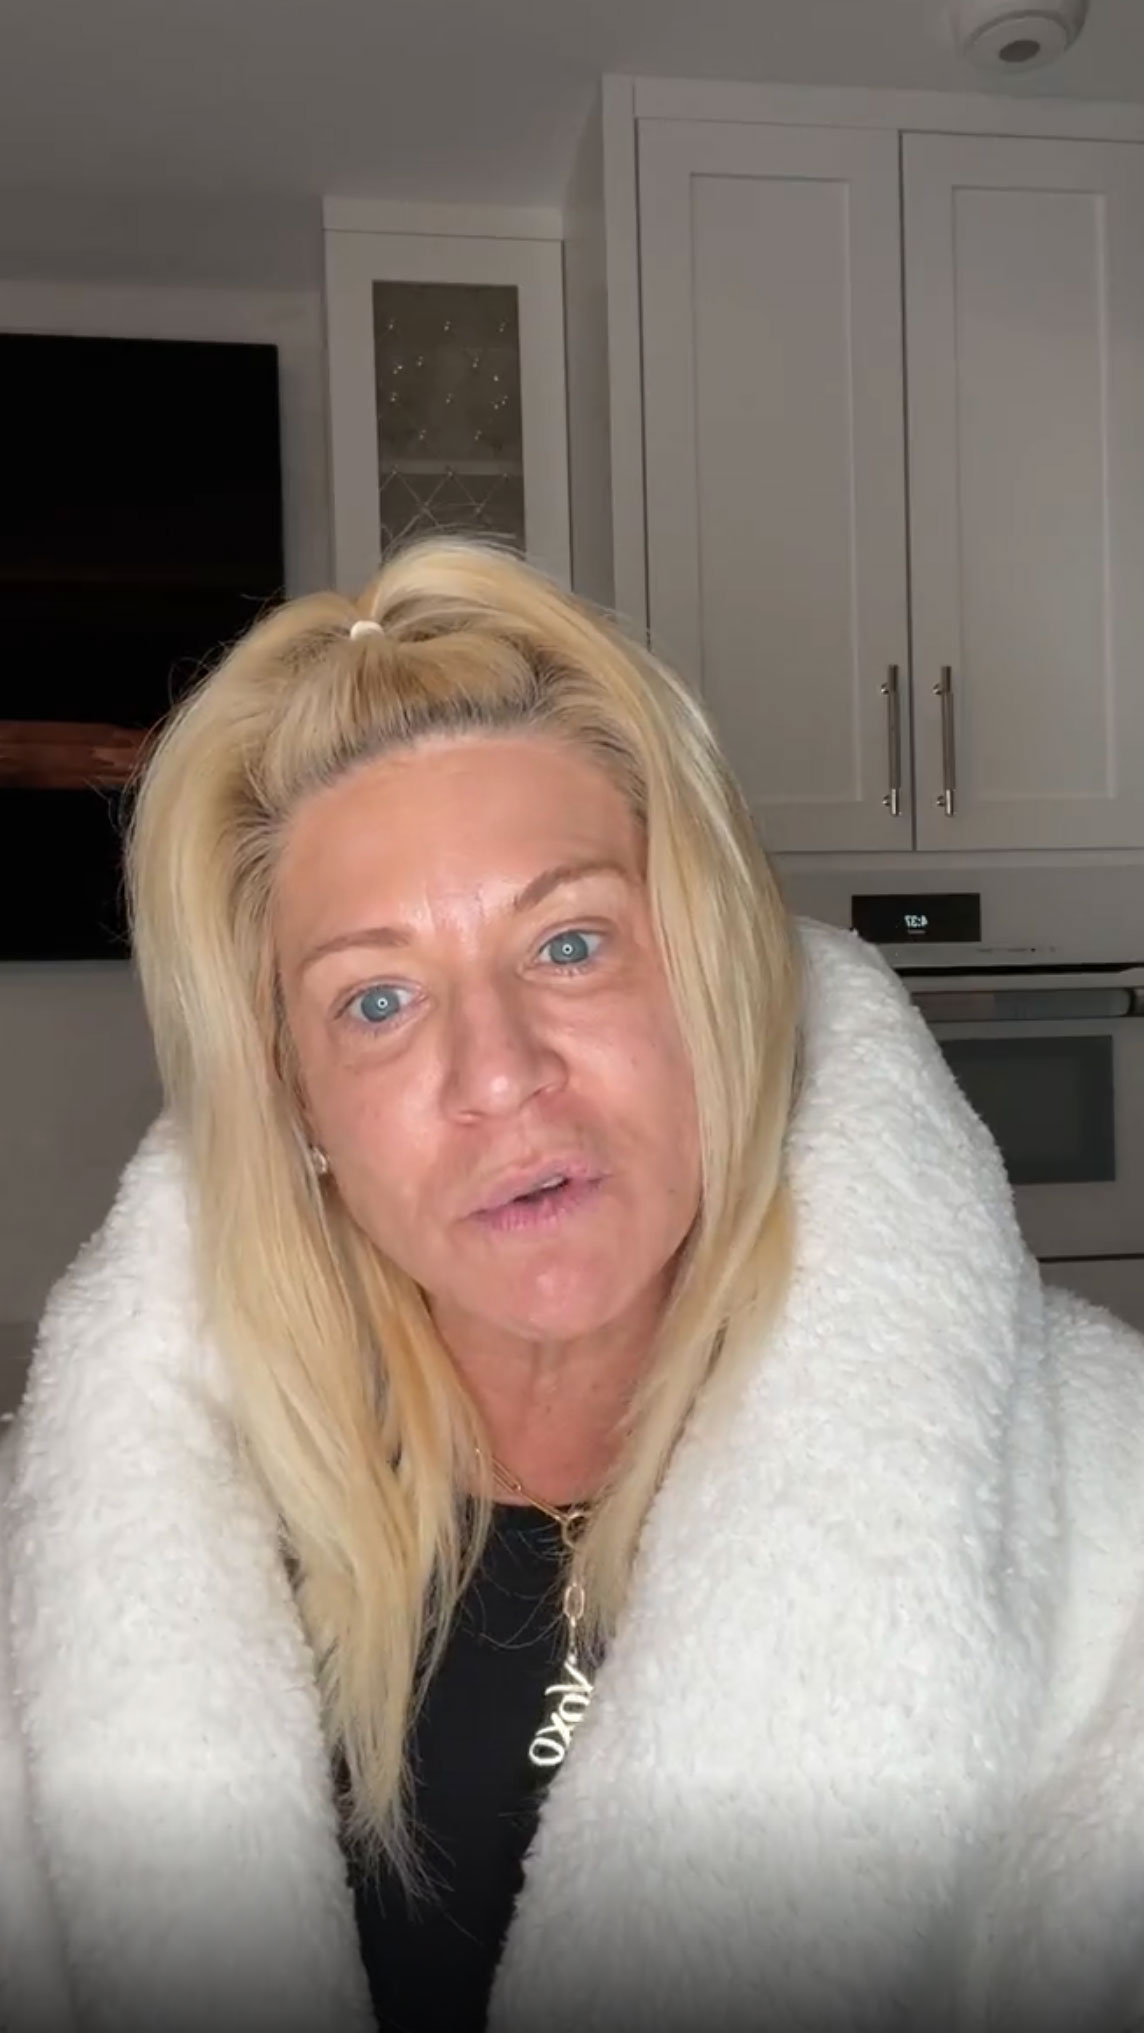 The daughter of Long Island Medium star Theresa Caputo addressed her haters by saying she is able to 'laugh and shake off' the negativity